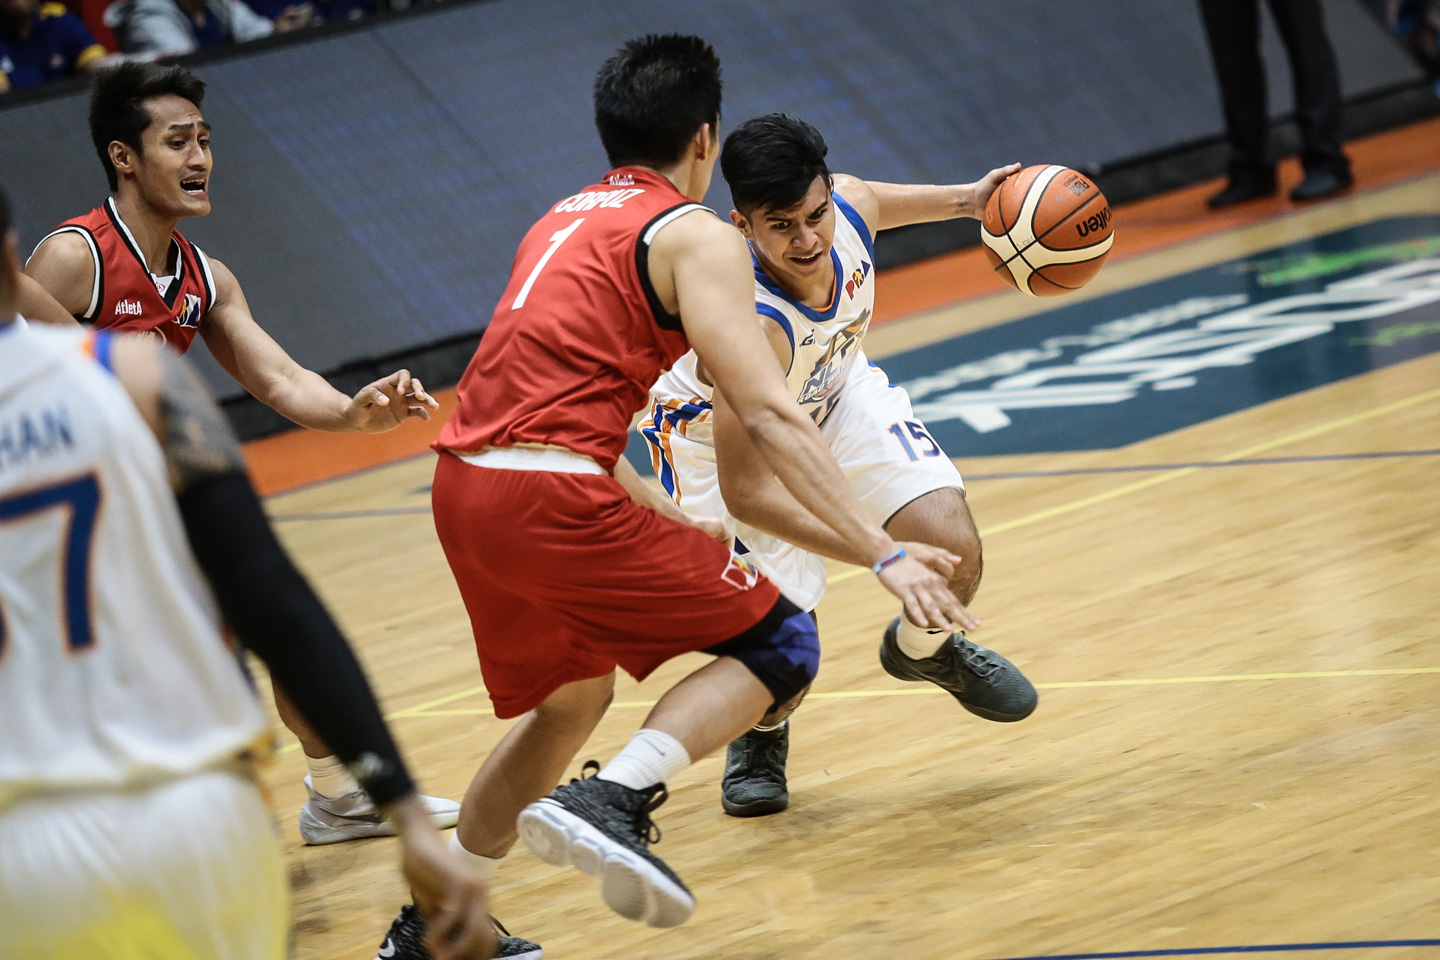 PRAISE. Yeng Guiao likened Kiefer Ravena to a combination of Willie Miller and Paul Lee after his double-double PBA debut. Photo by Josh Albelda/Rappler  